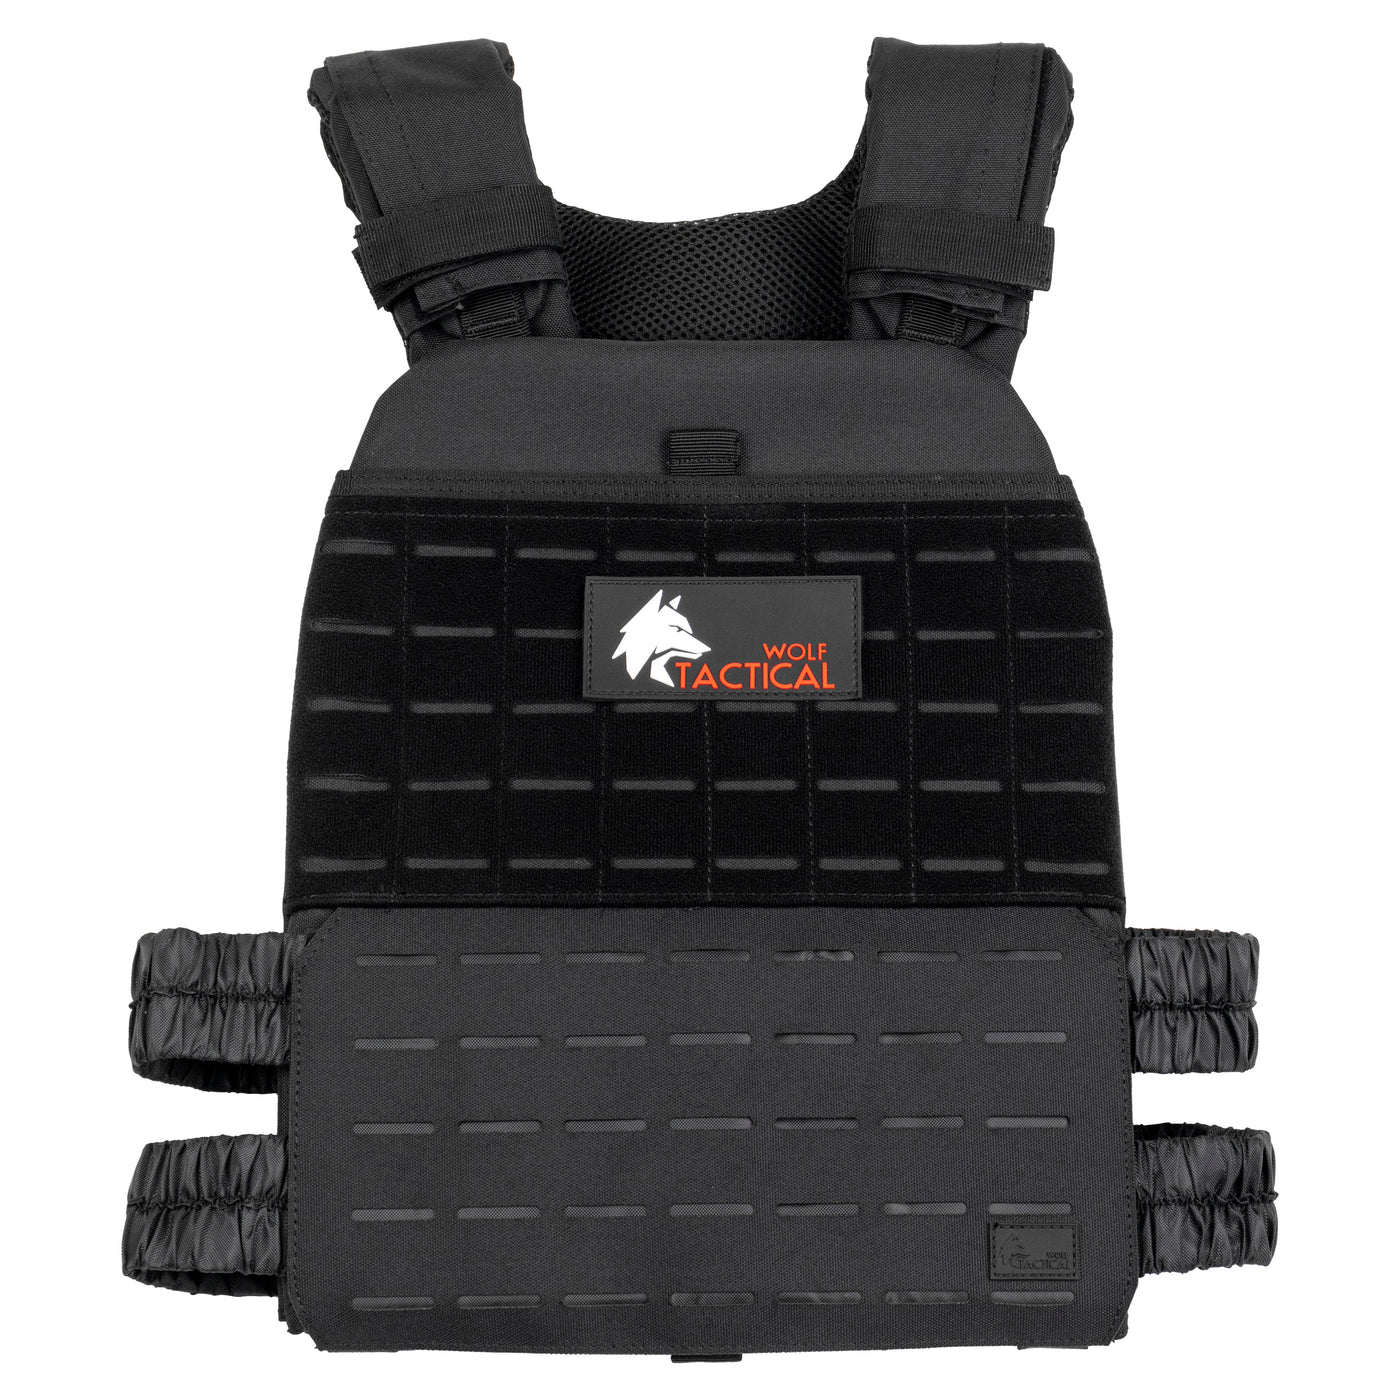 Alpha 1 Weighted Vest - Black - Rise